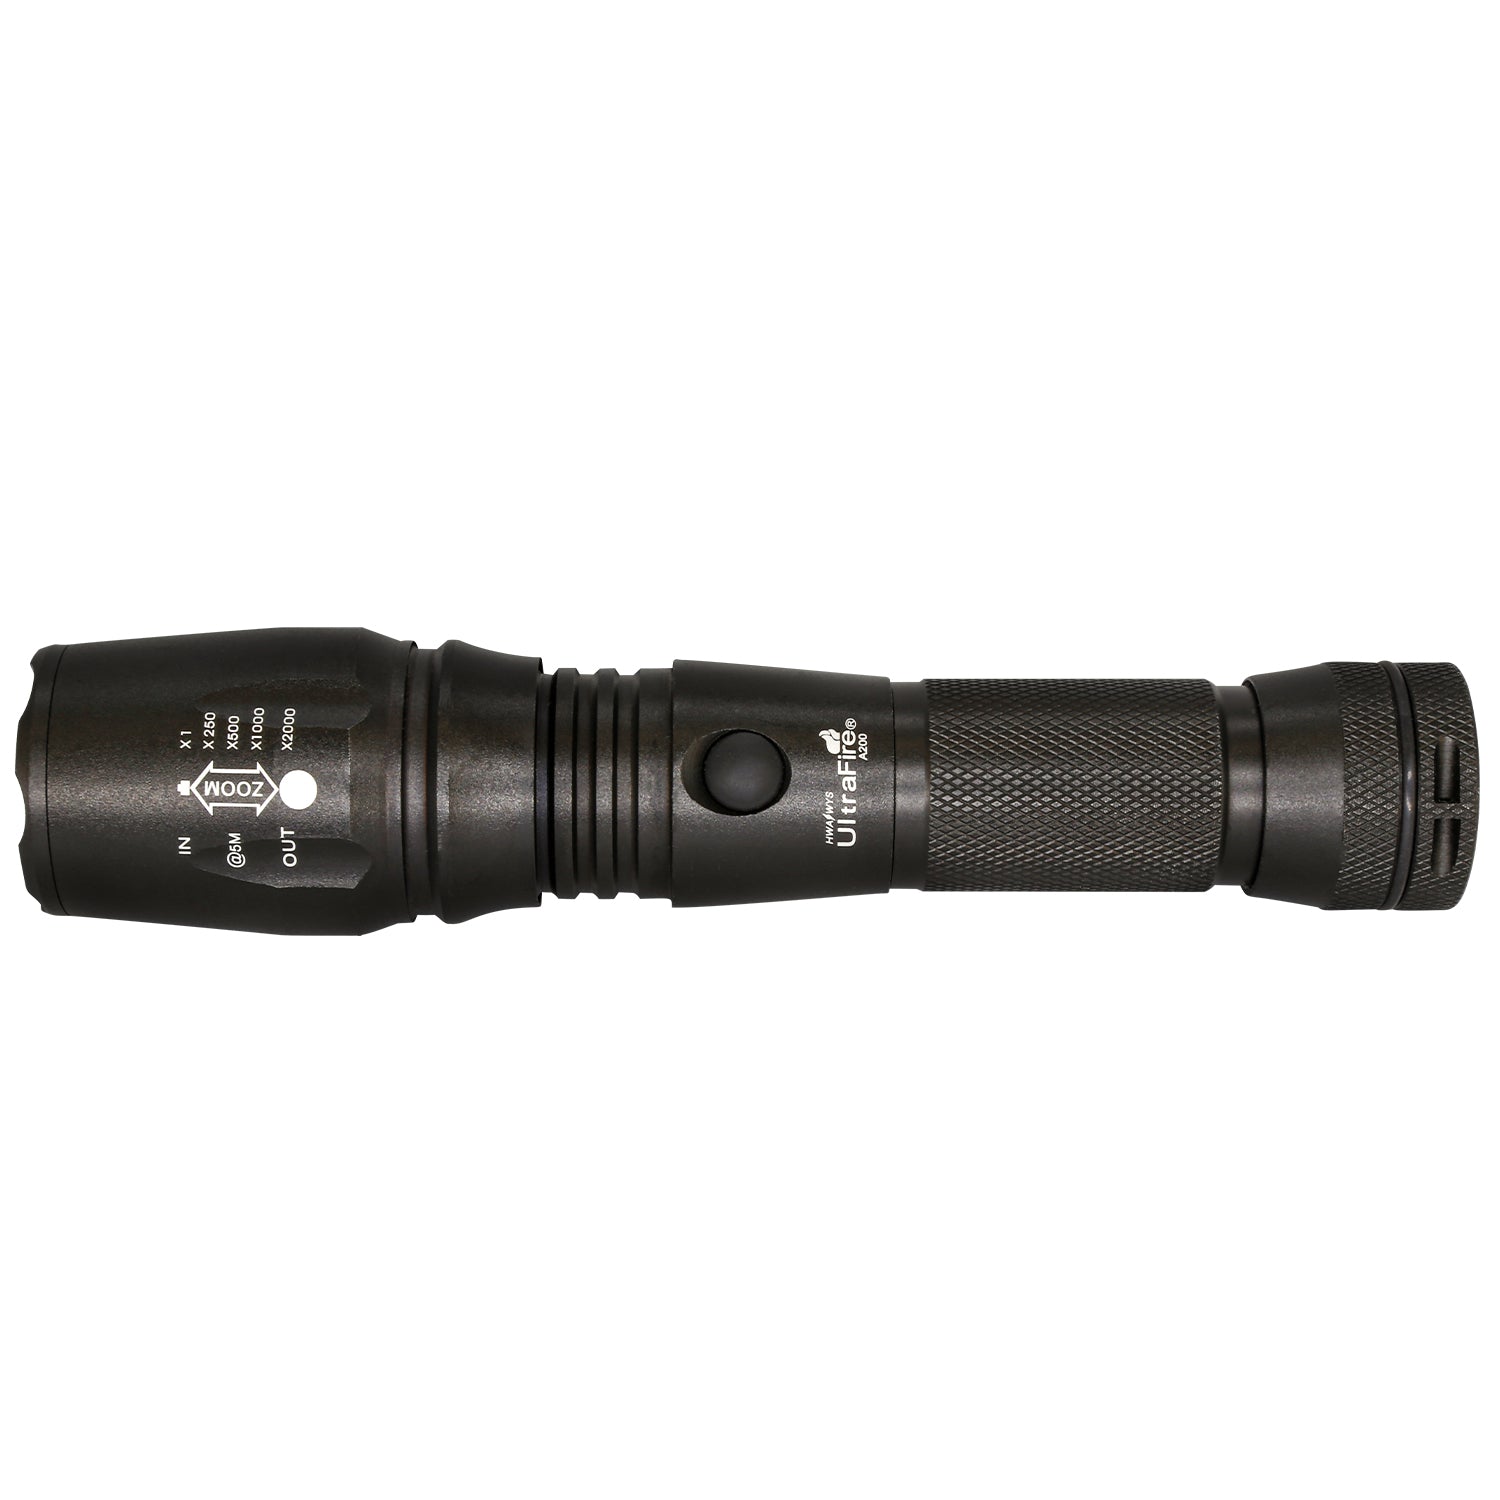 UltraFire A200 Zoomable Flashlight